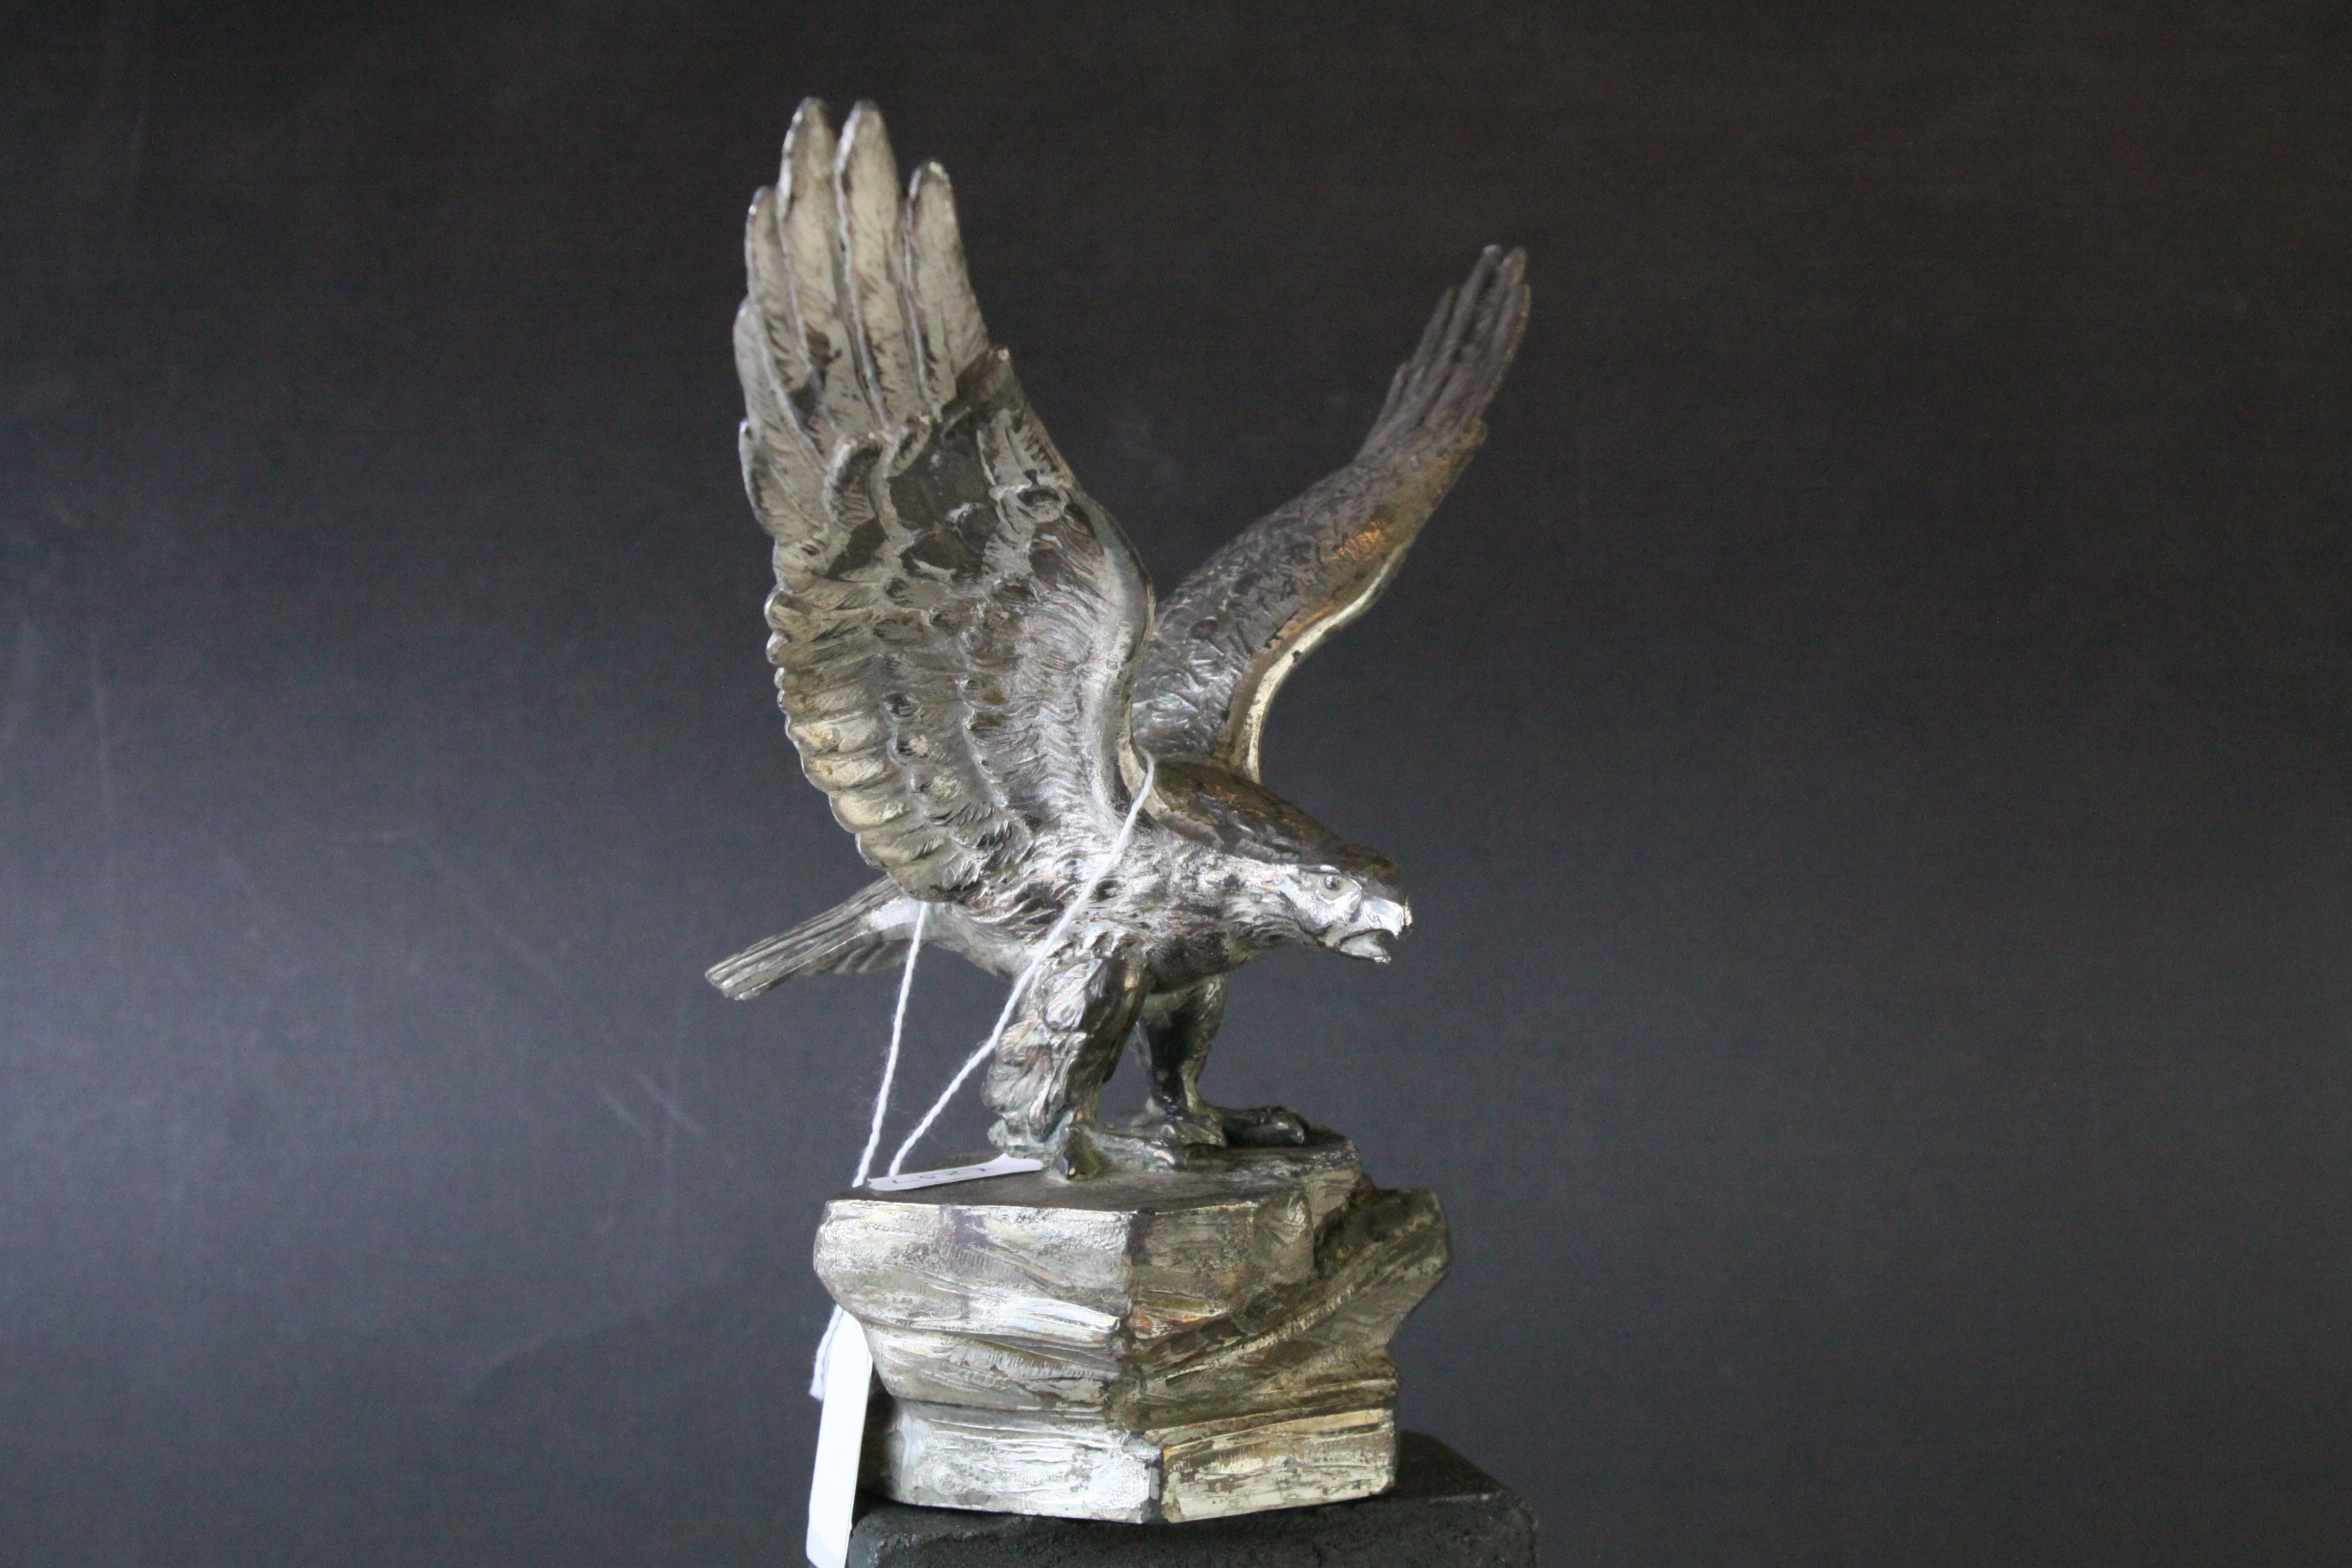 Sculpture of a Silver Plated Eagle on a Rock